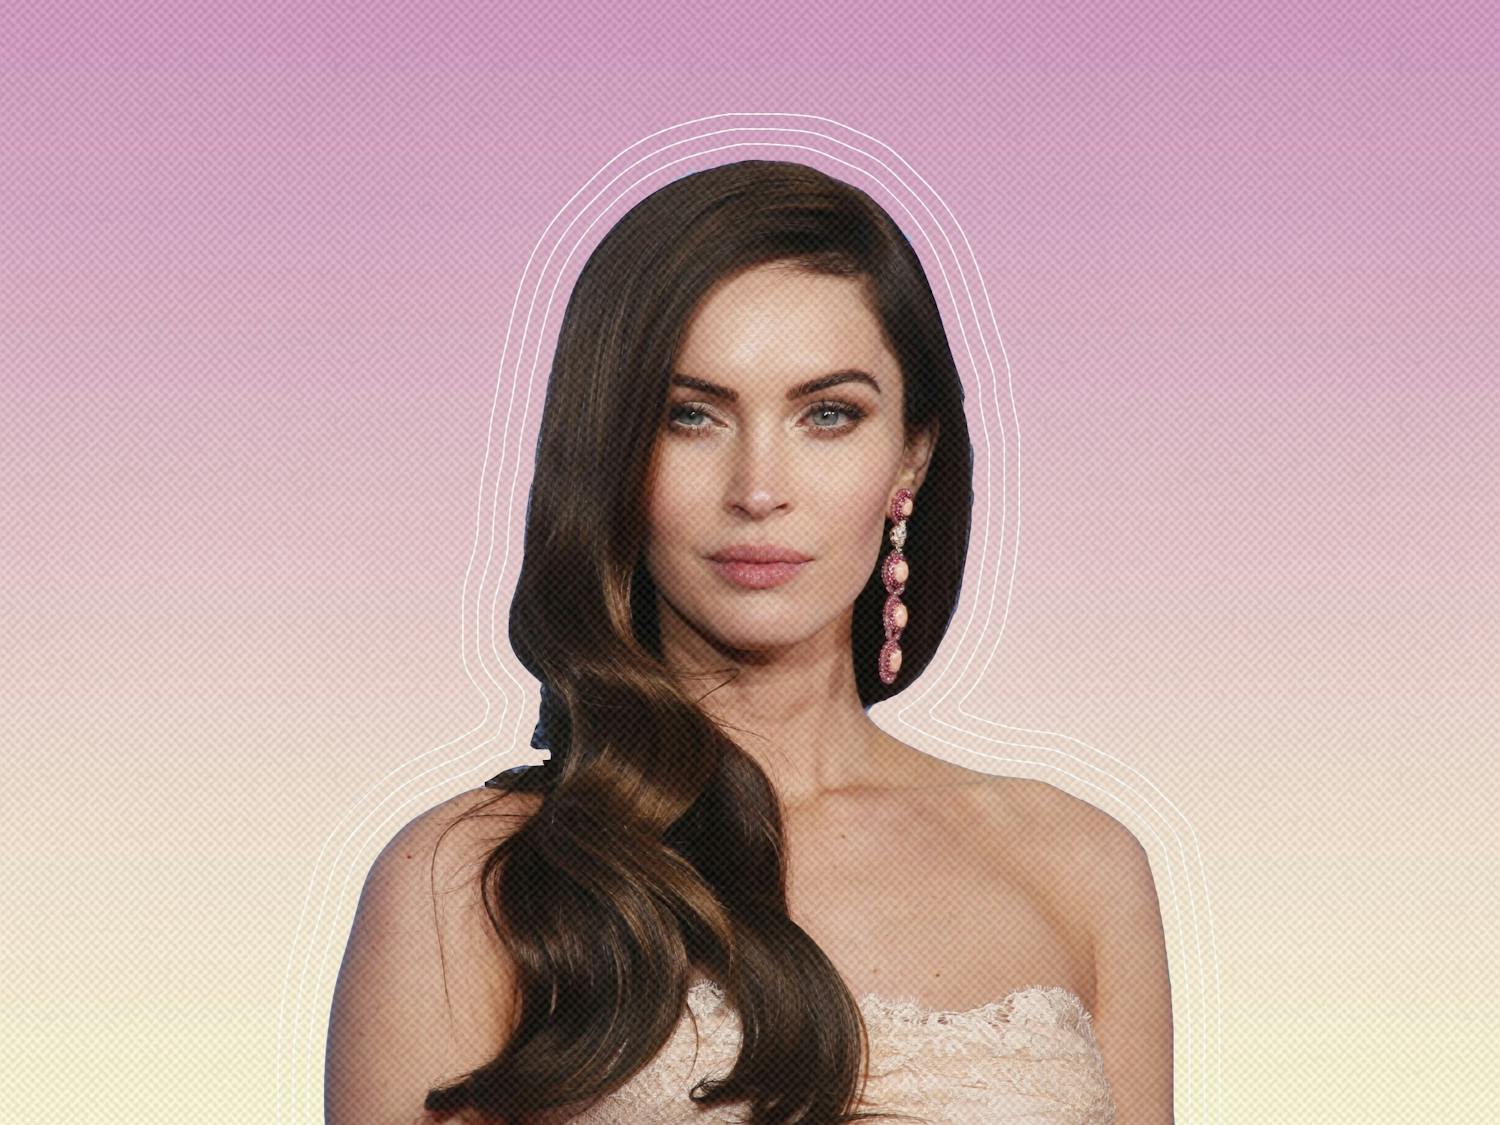 Megan Fox is known as a brunette bombshell, but she has always striven to be seen as more than just a pretty face.